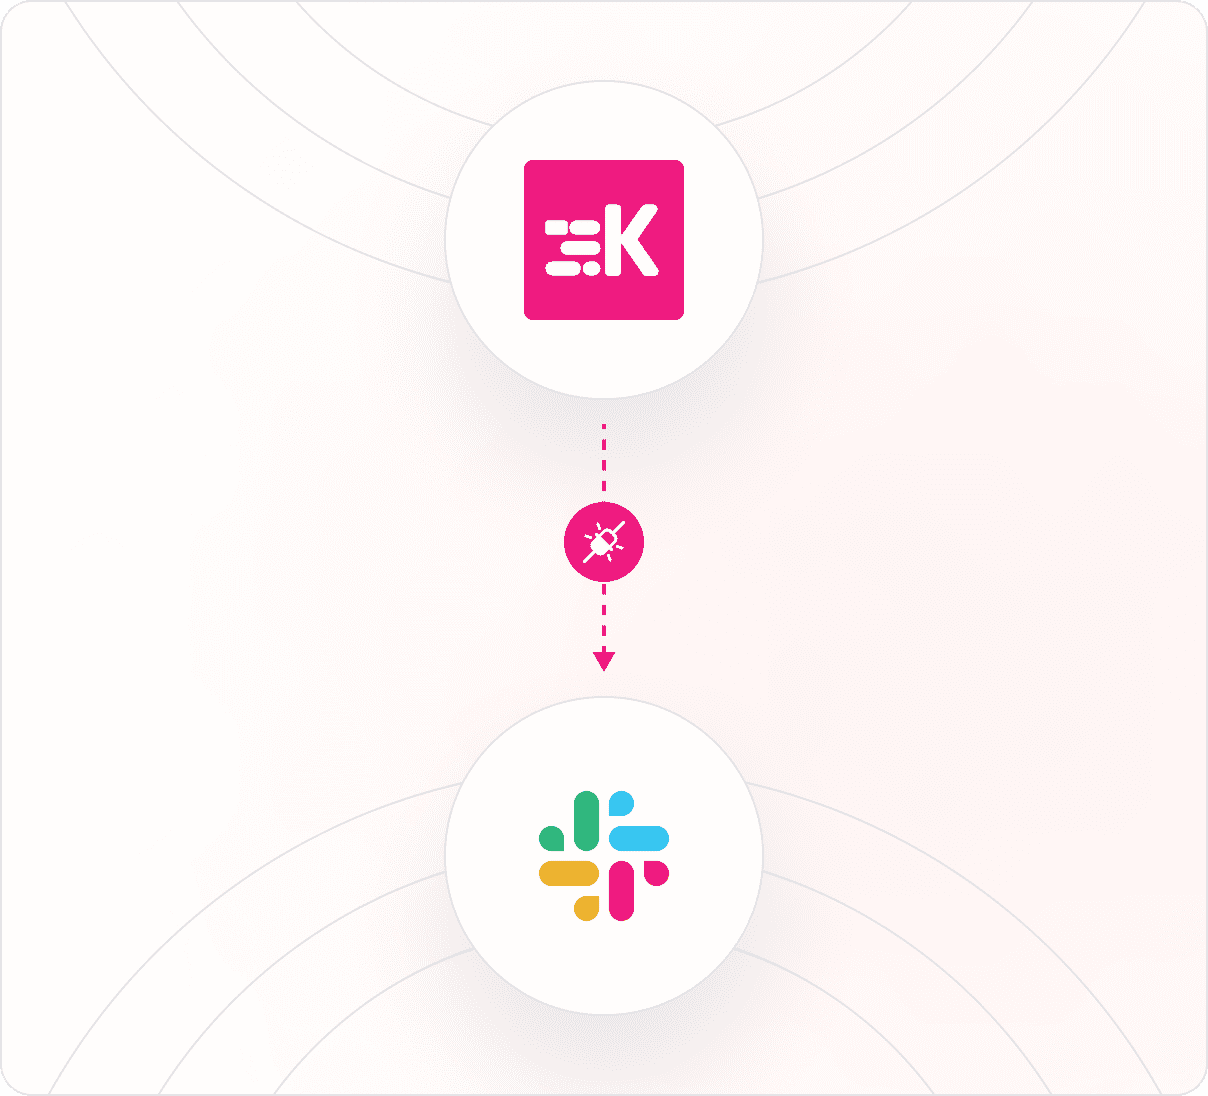 This is an image of a Kadence logo and a Slack logo